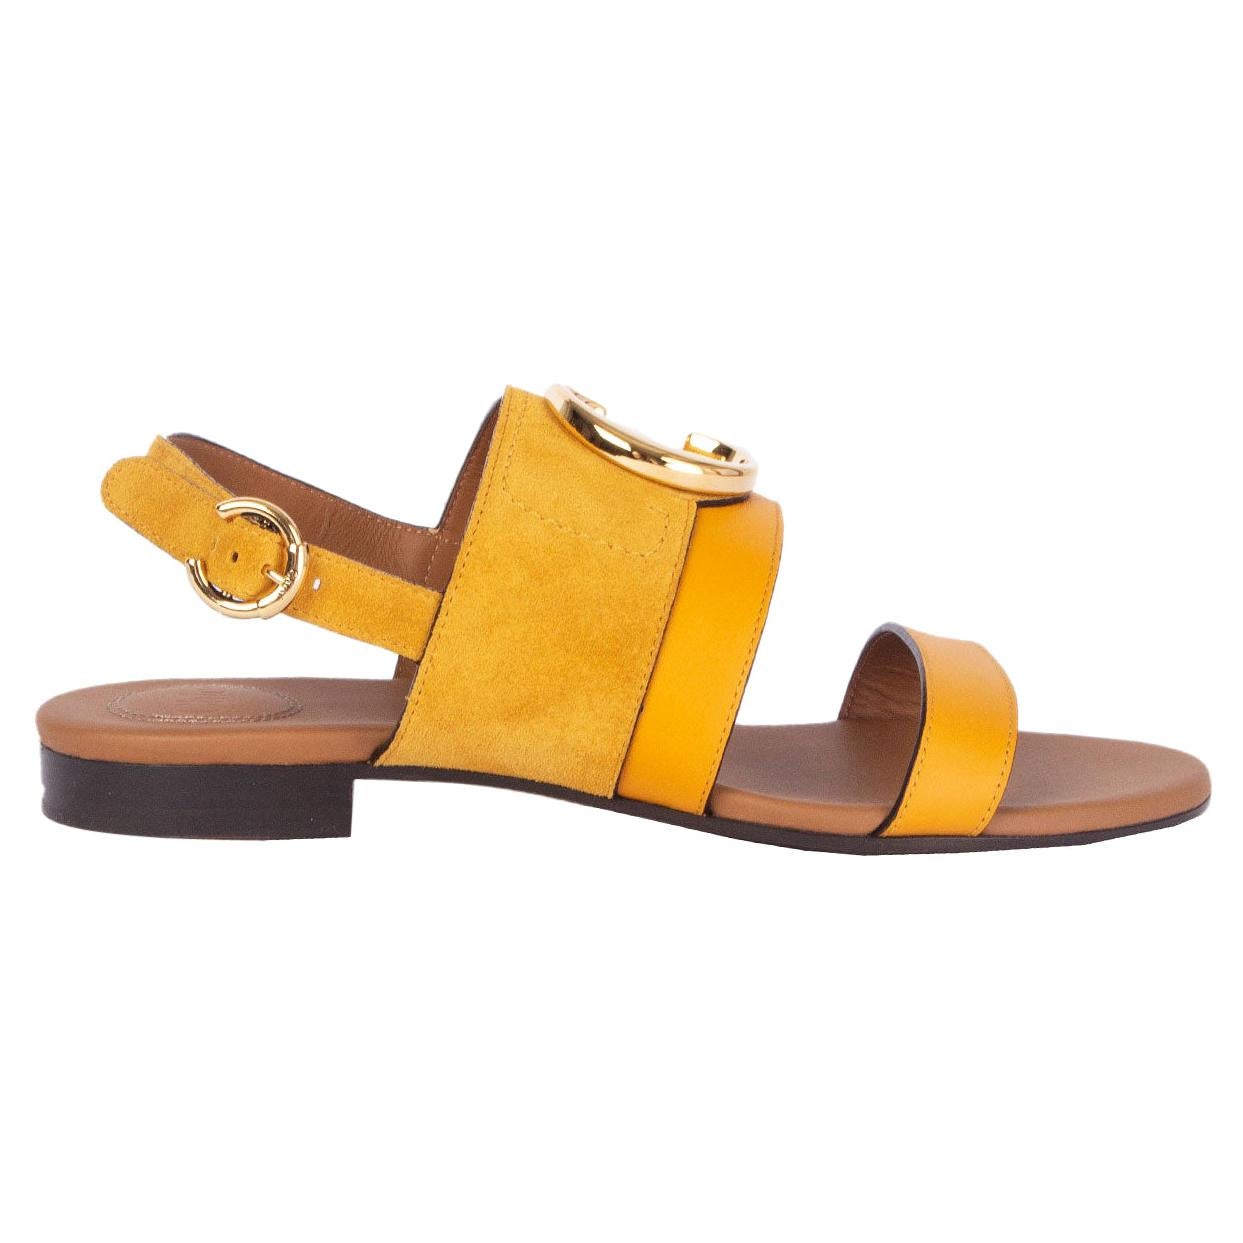 CHLOE curry yellow suede C LOGO Flat Sandals Shoes 37.5